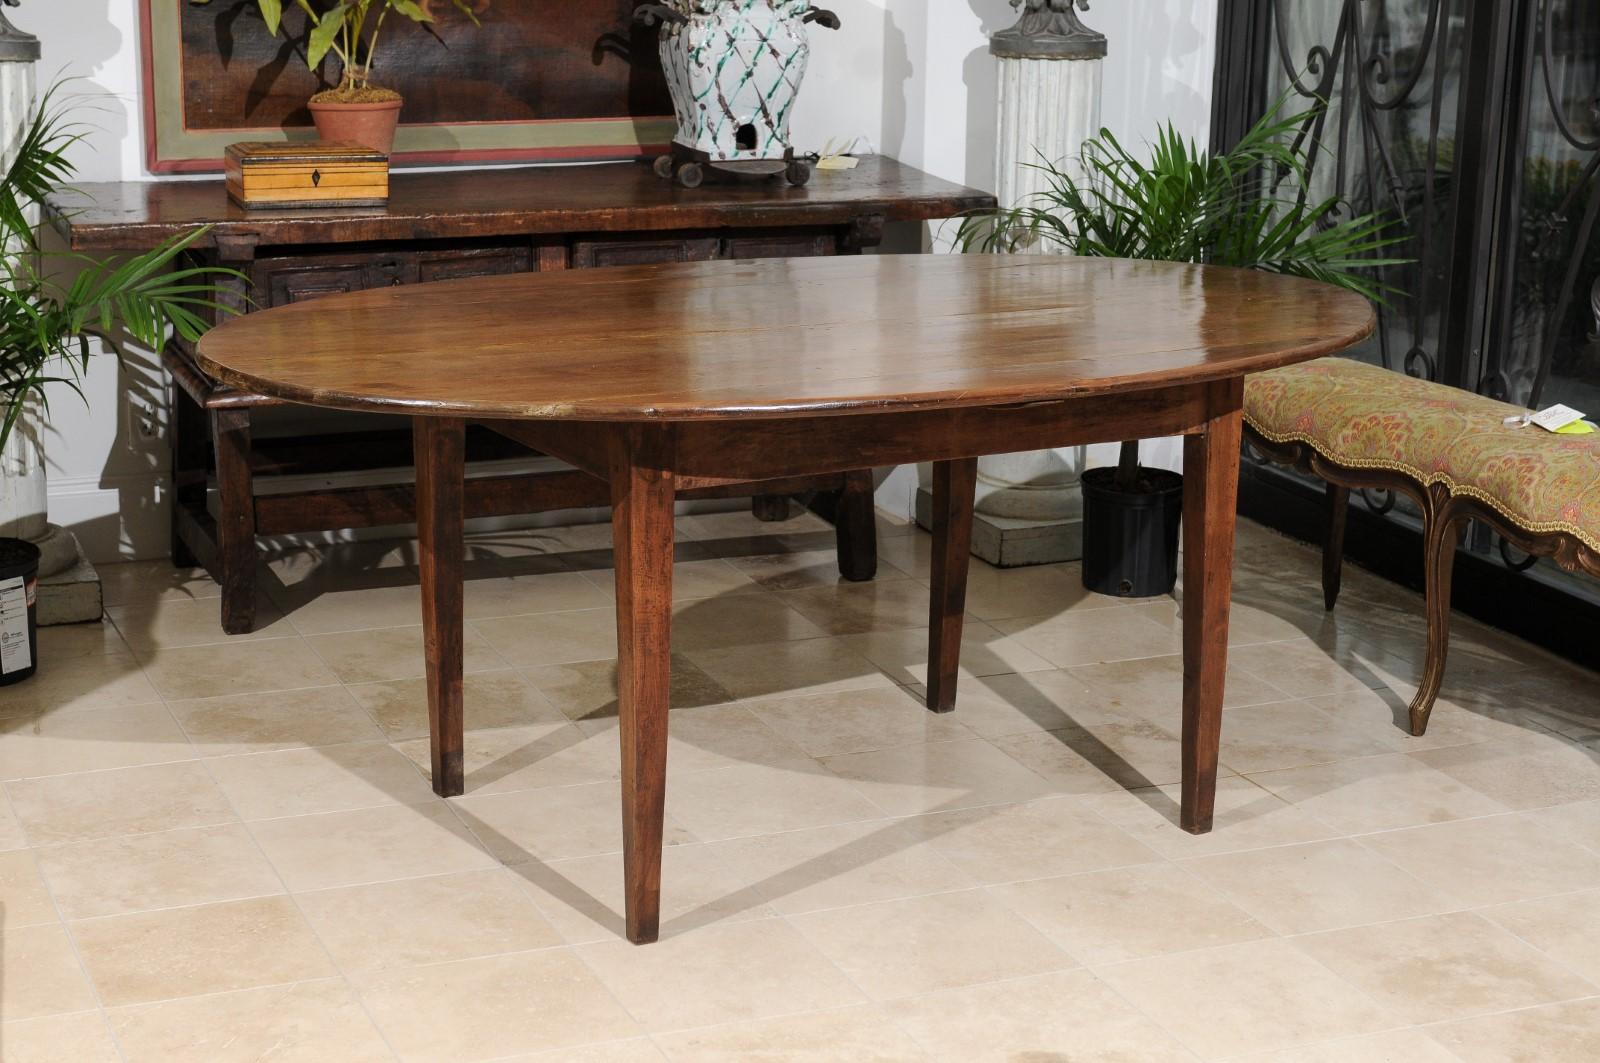  French Oval Farm Table with Tapered Legs 2